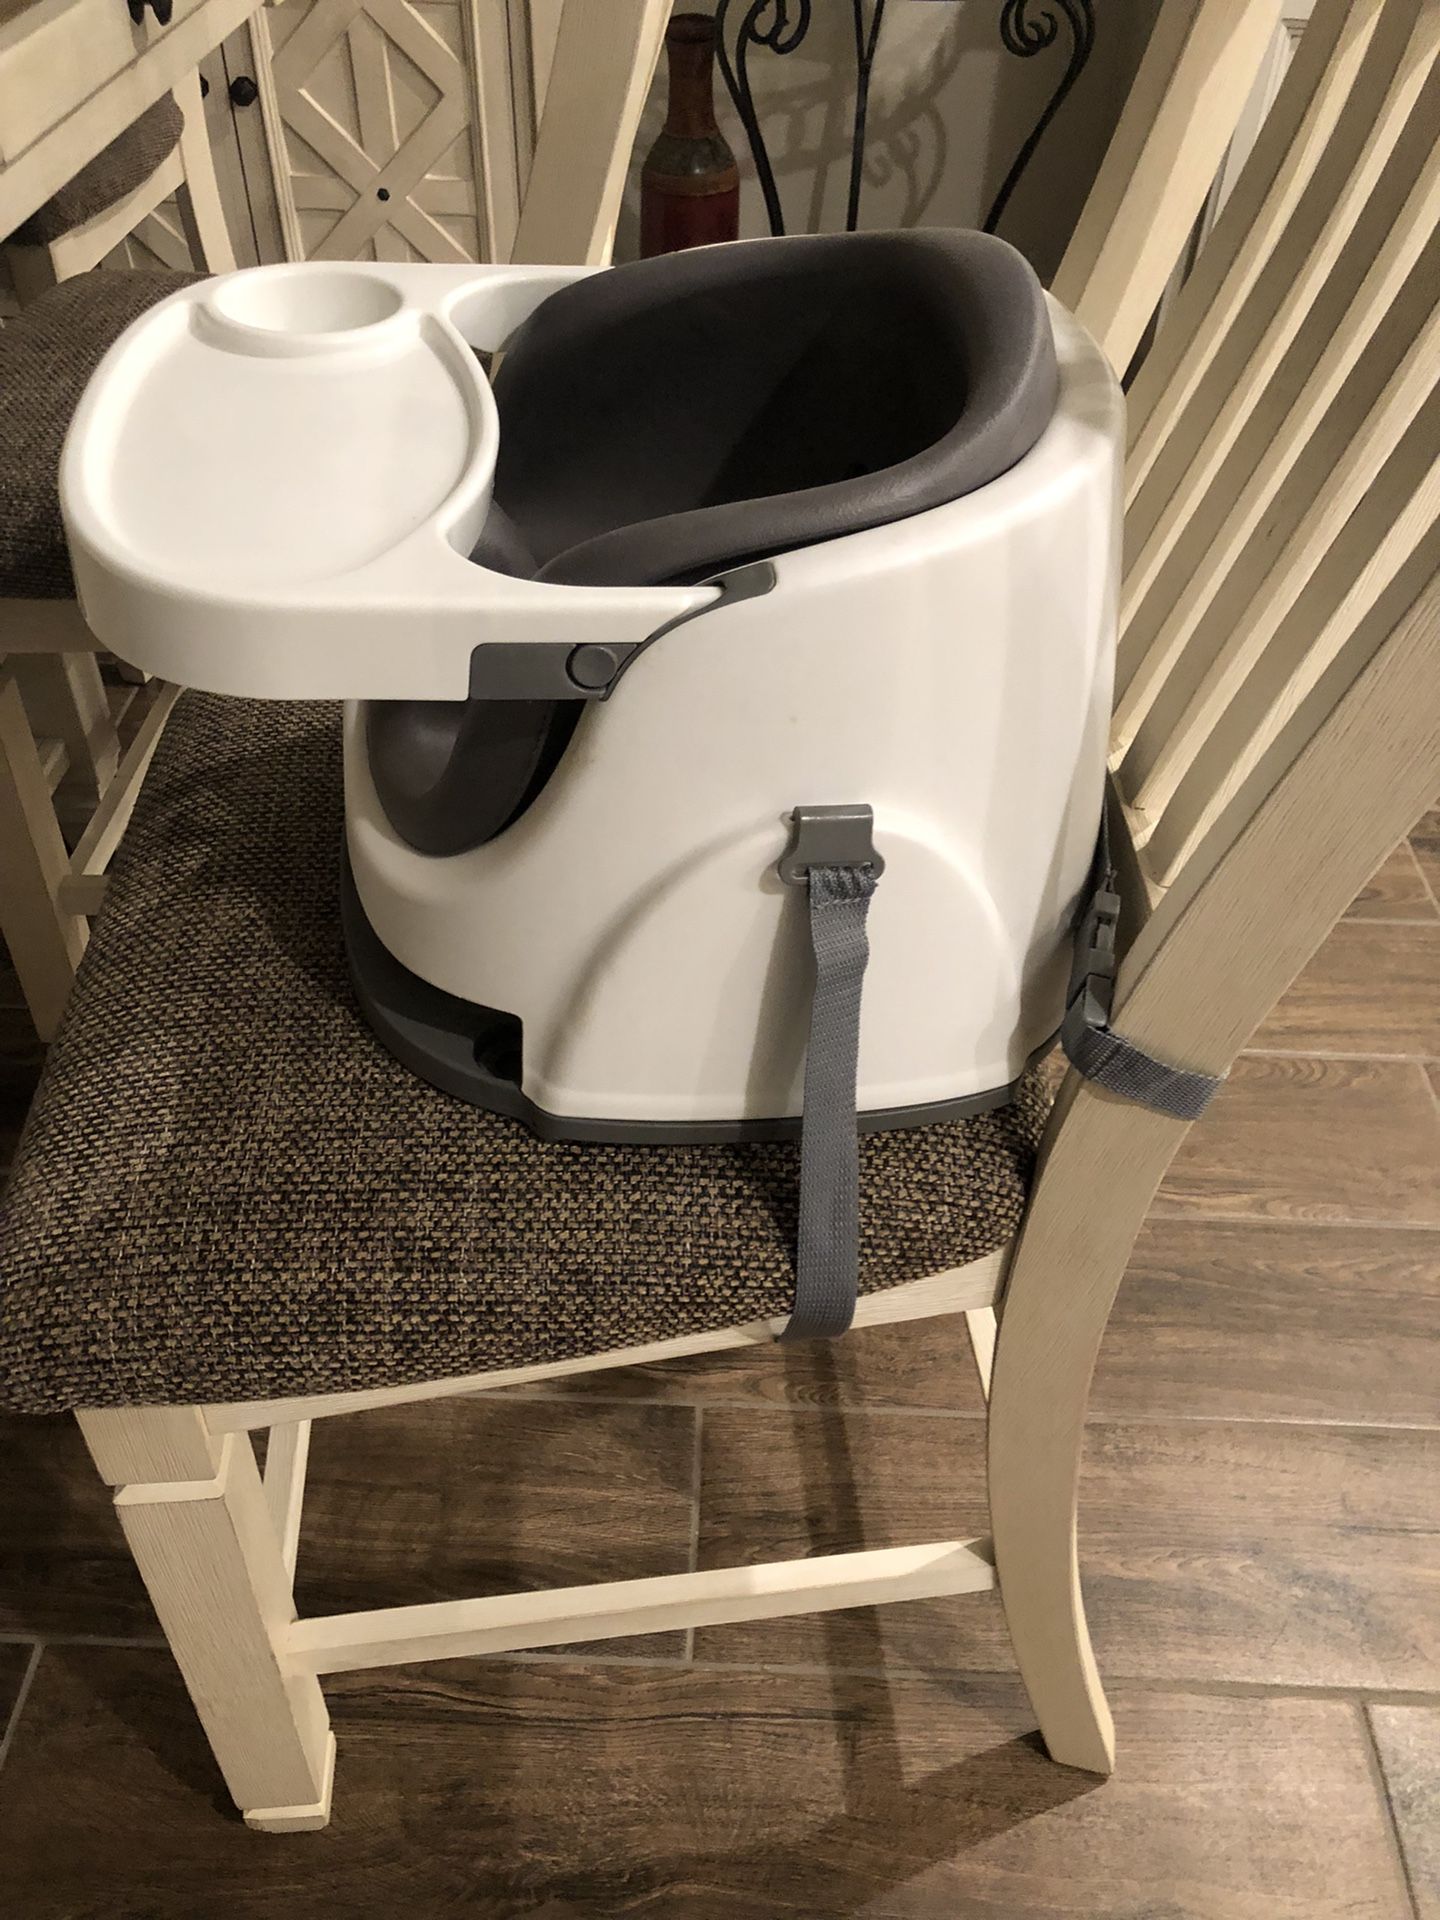 Baby Seat 20.00 Pickup In Mesa Near Ellsworth And Ray 